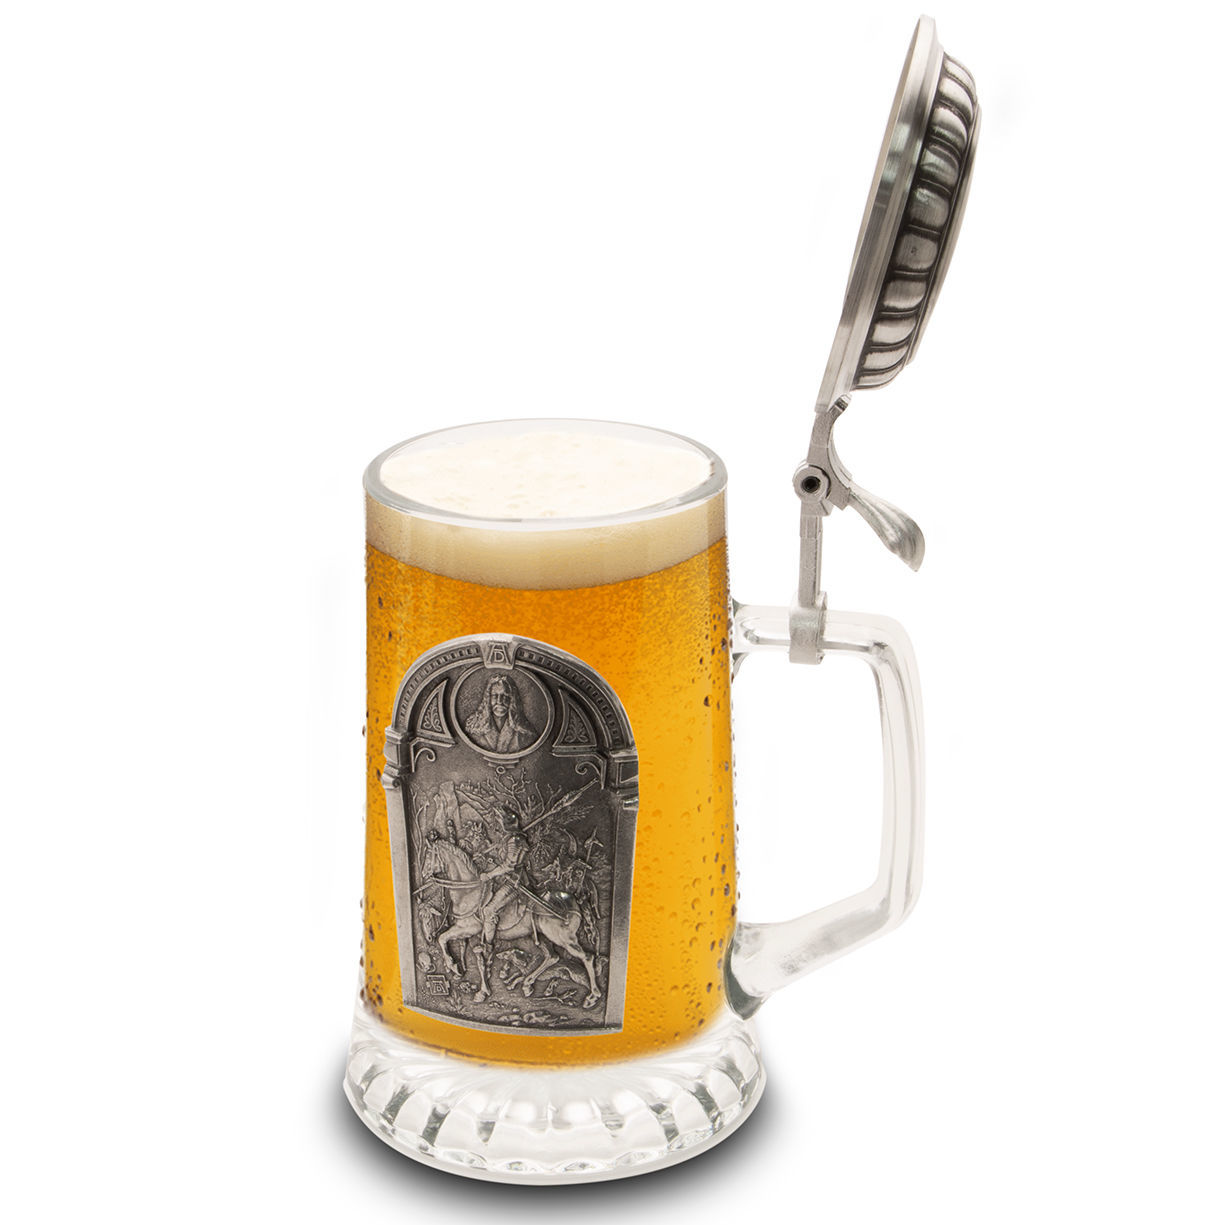 heavy glass starbottom stein features the Dürer image “A Knight, Death and the Devil” on a pewter medallion with lid